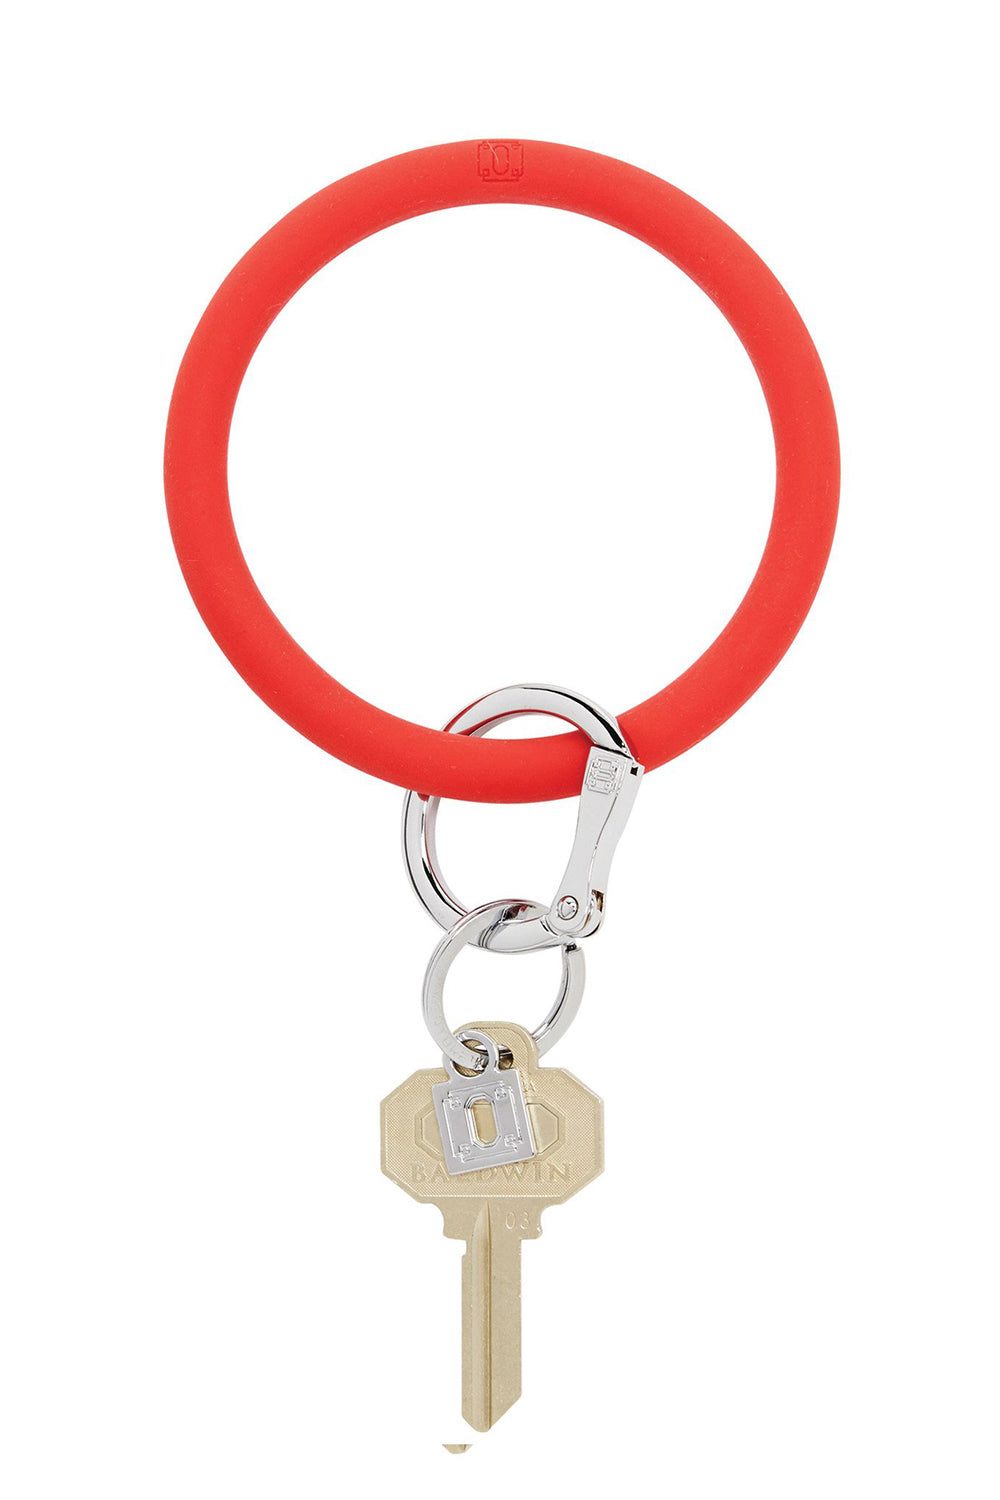 Silicone Big O Key Ring - Solid Cherry on Top Red